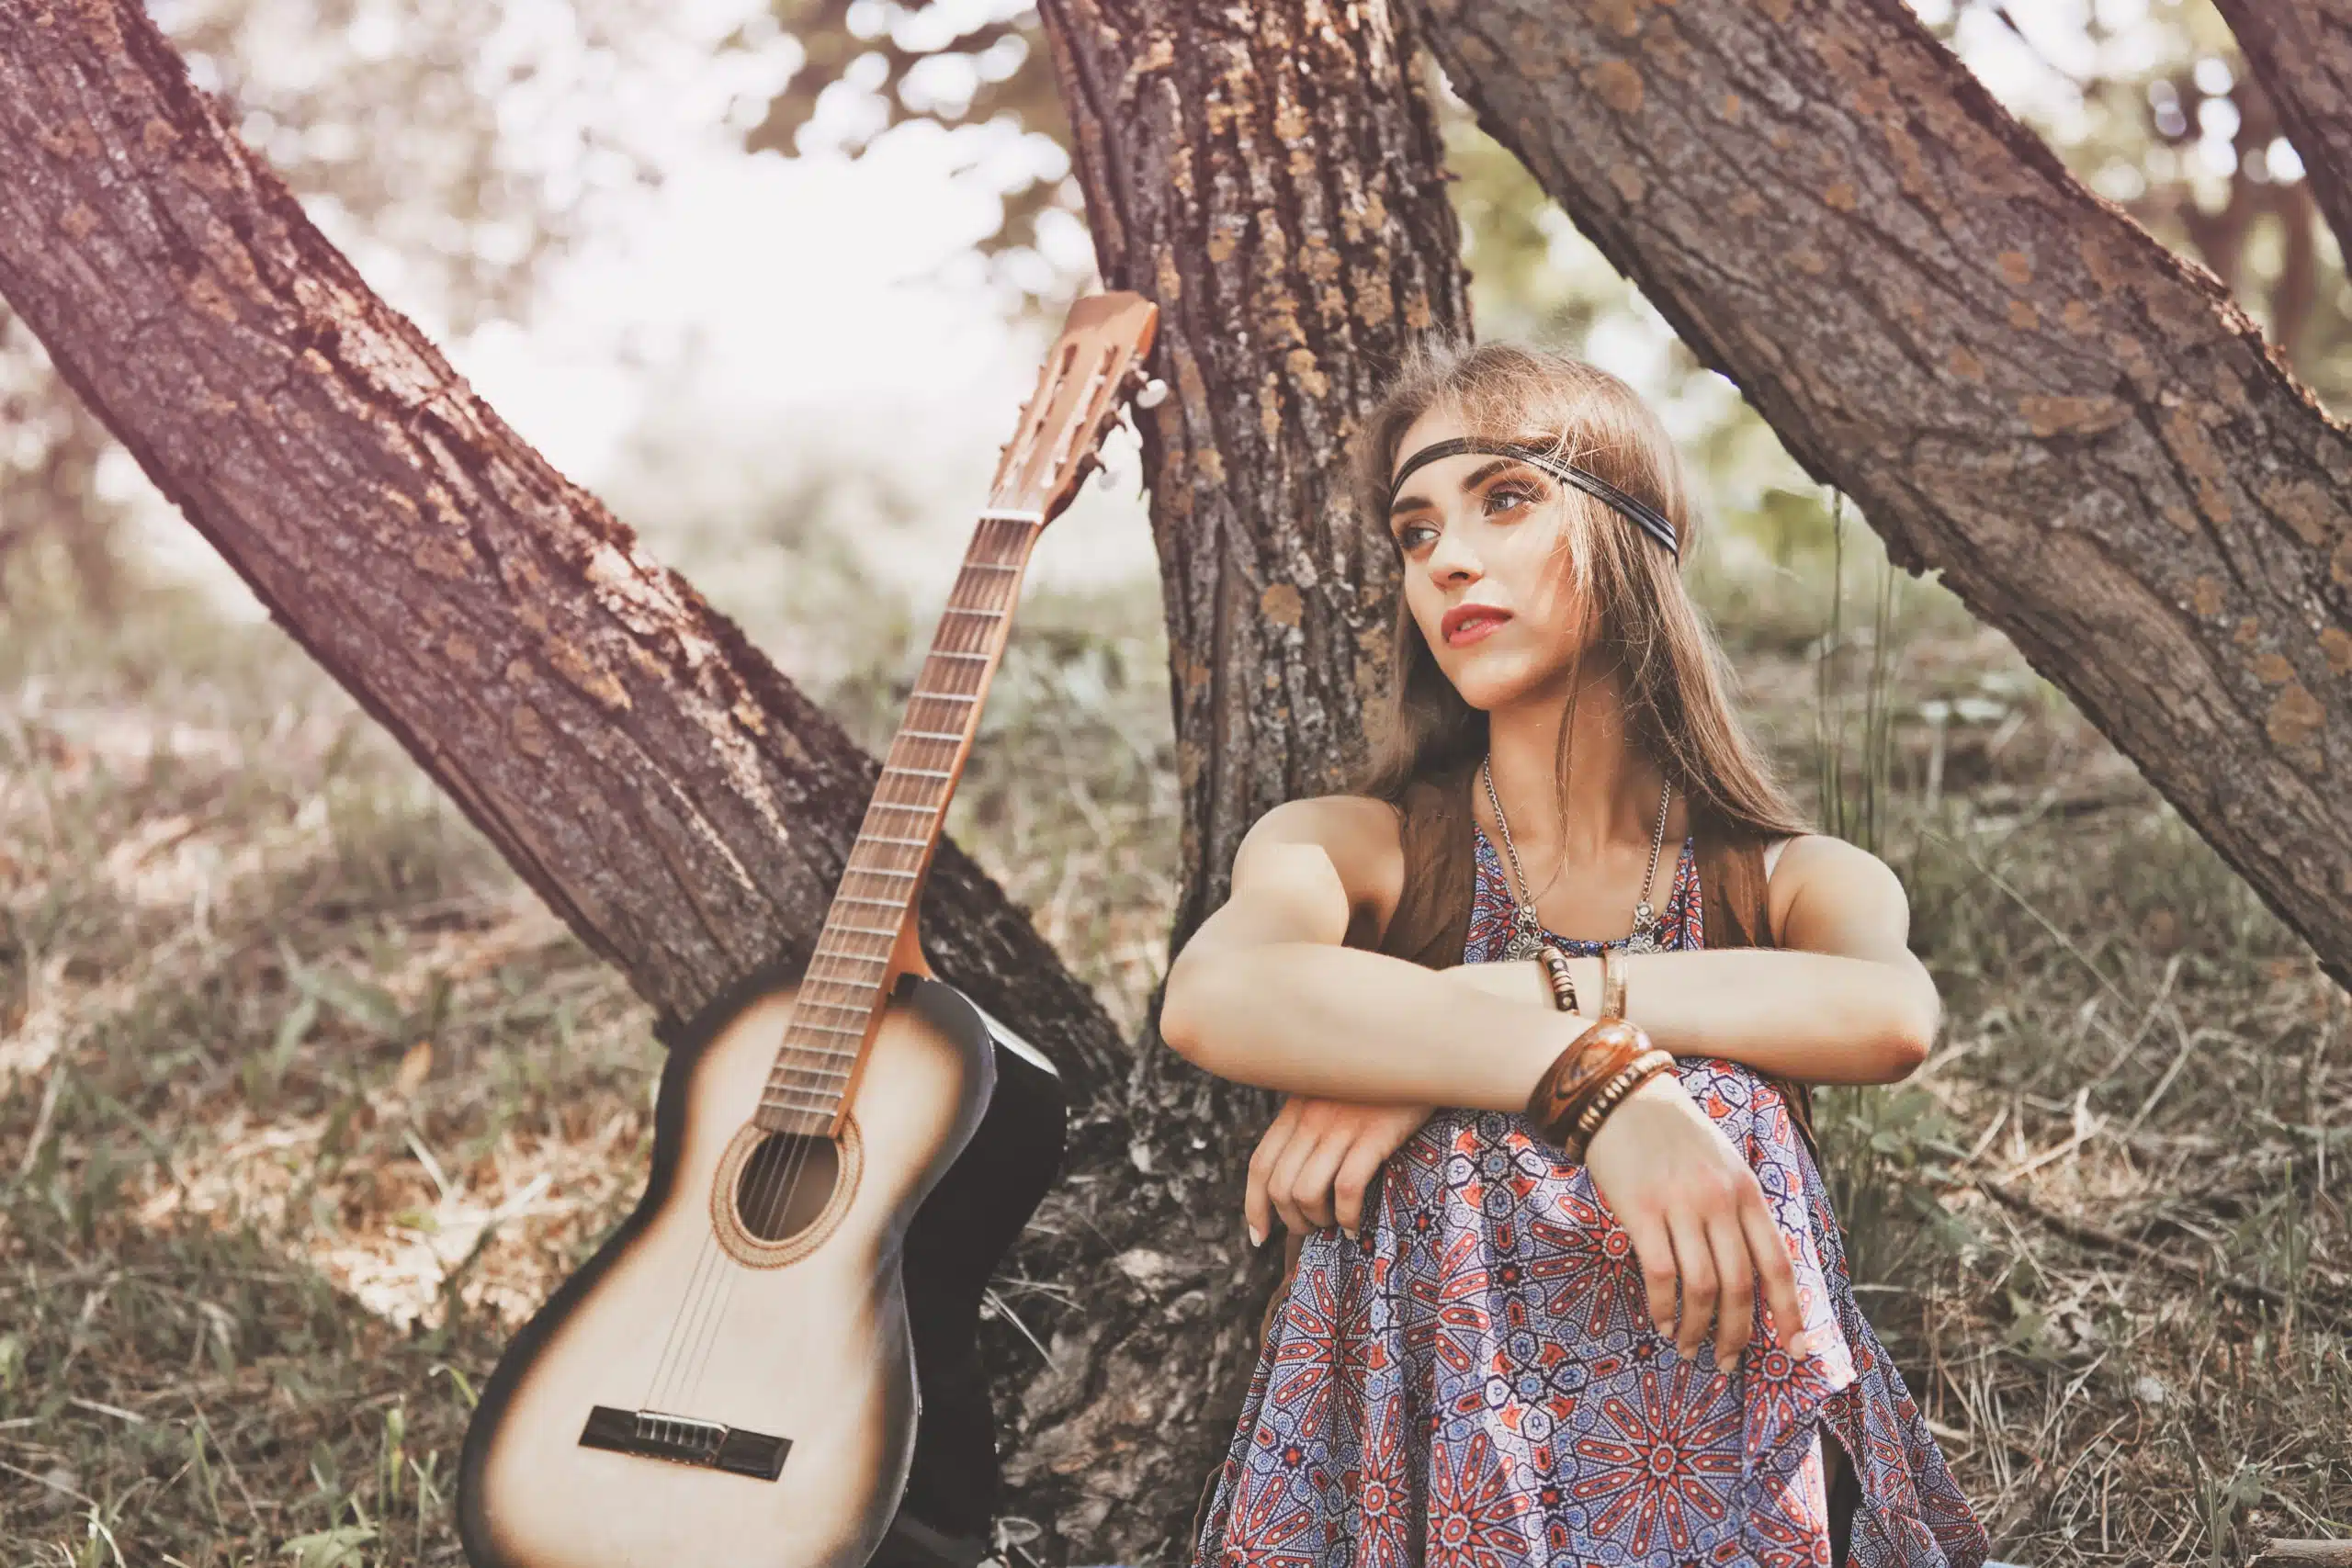 Pensive young hippie woman sitting near a tree, a guitar beside her